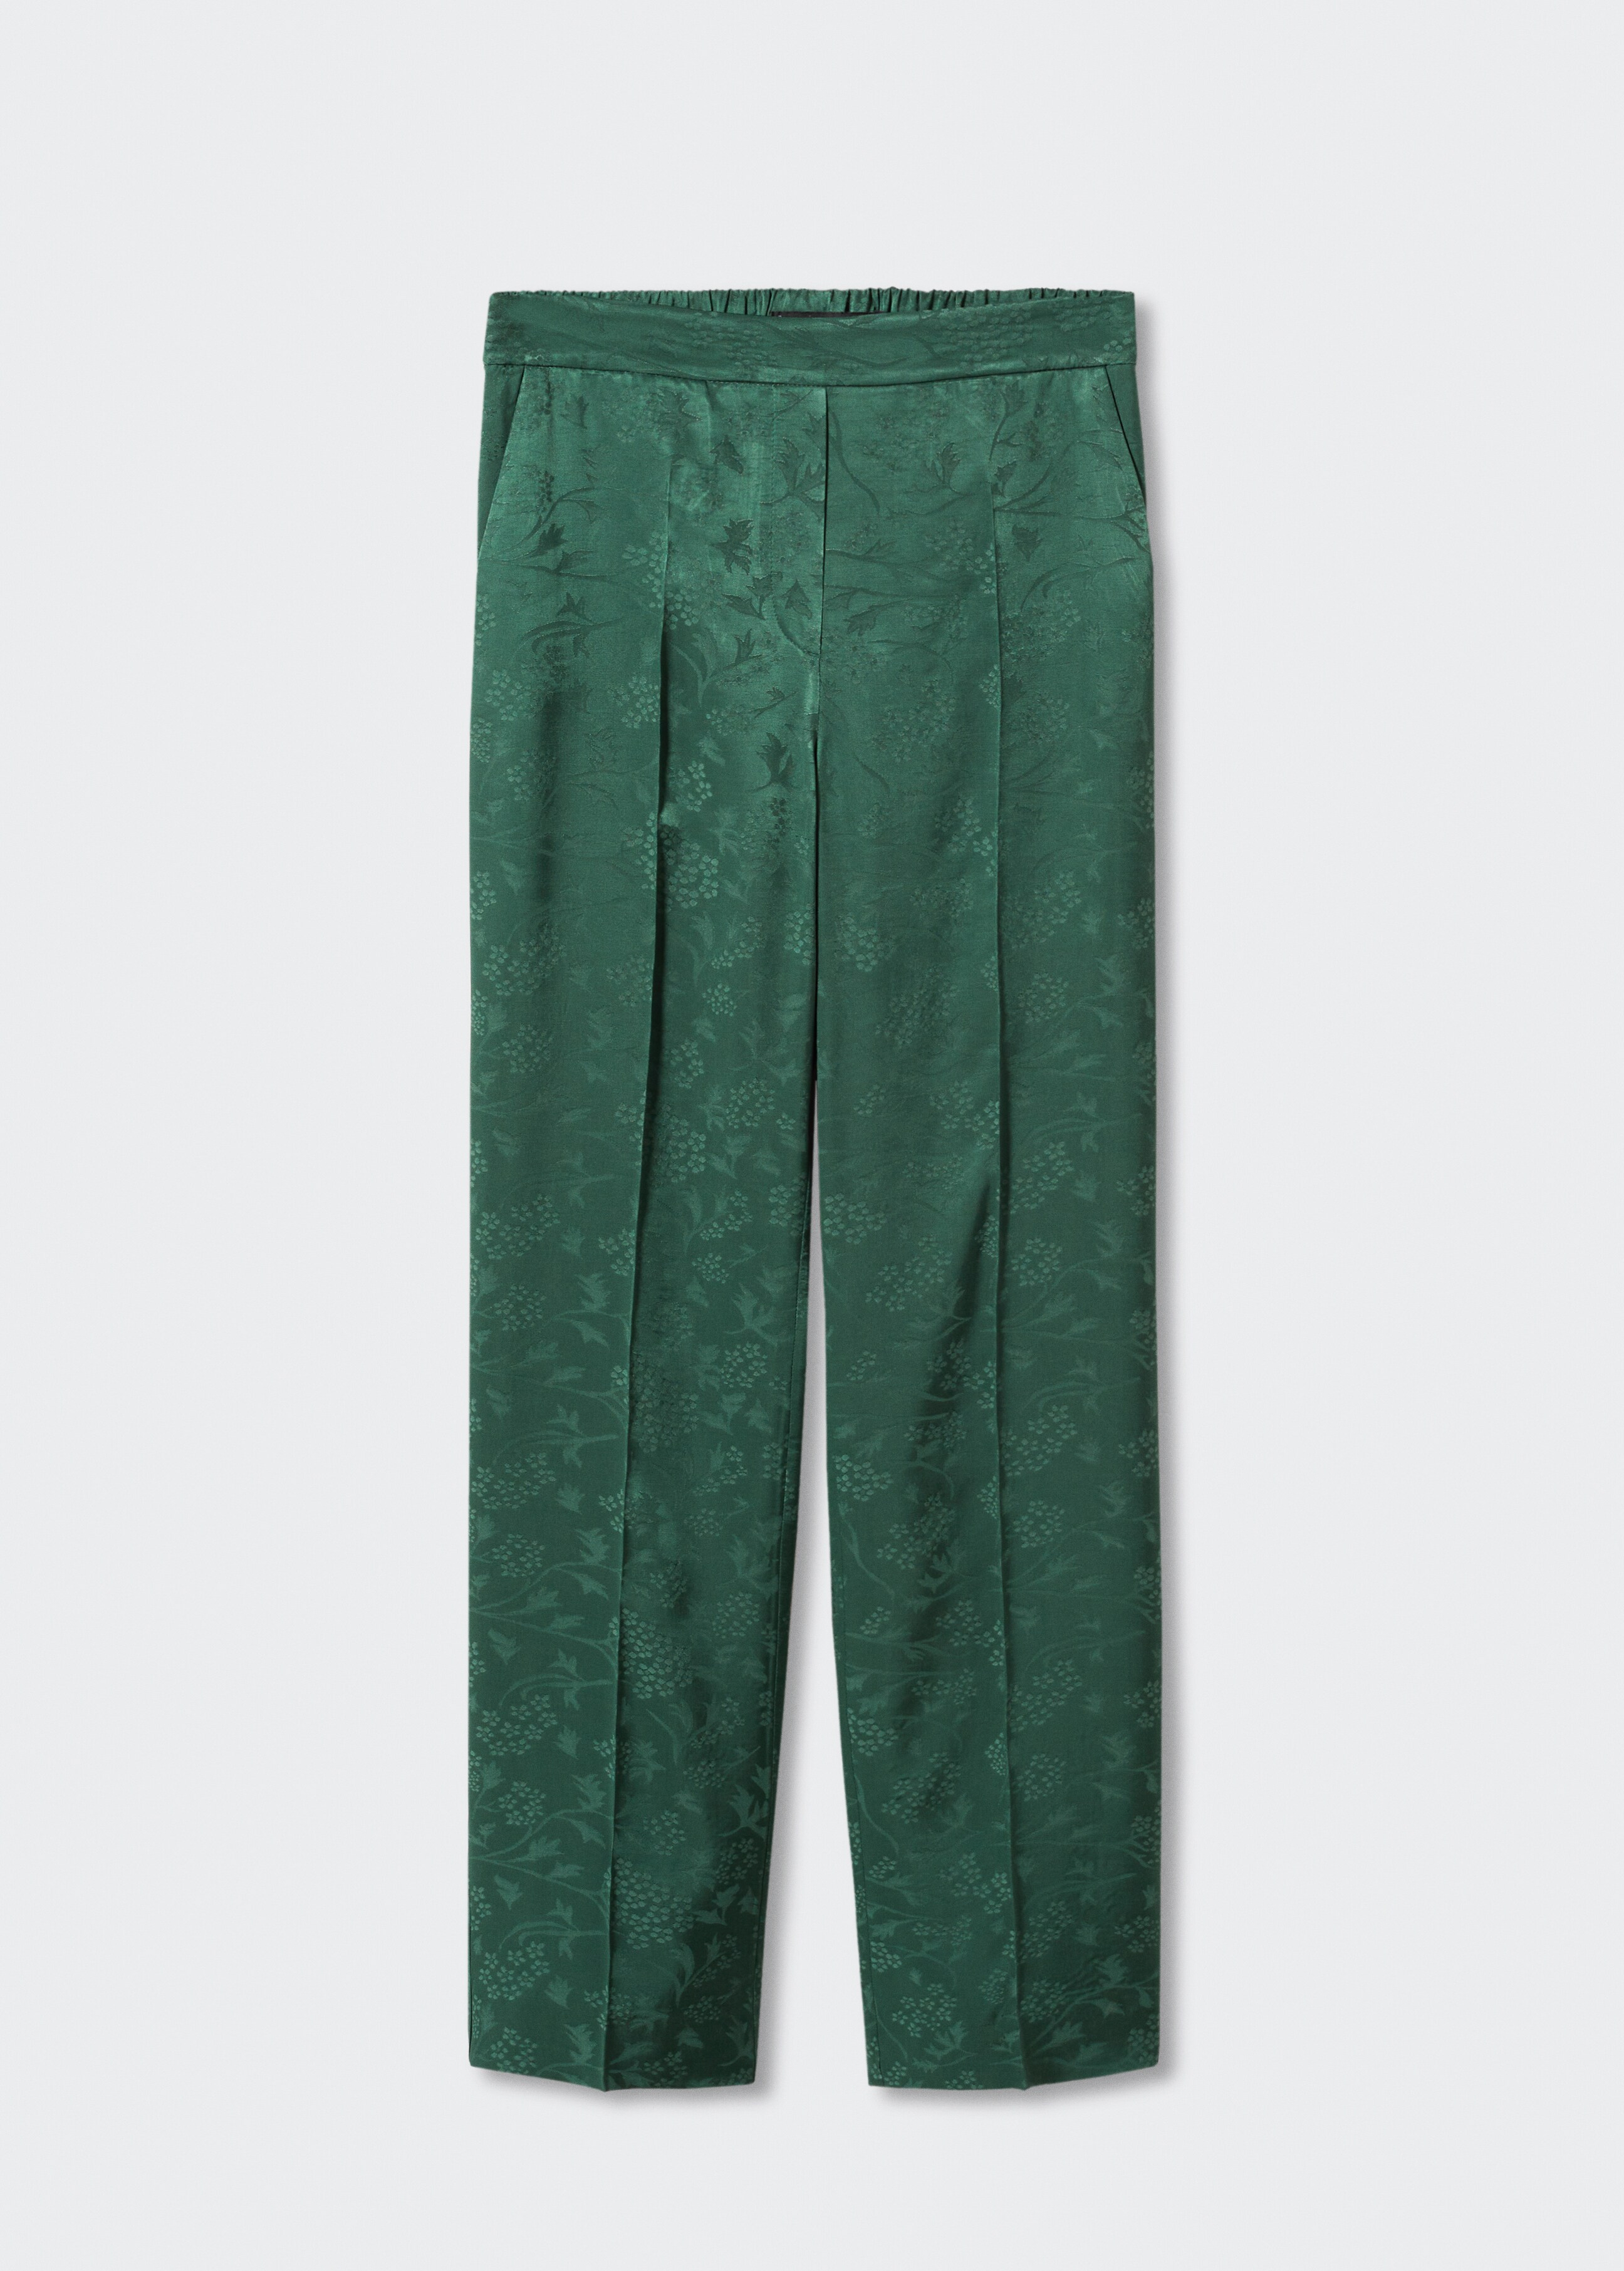 Jacquard suit trousers - Article without model